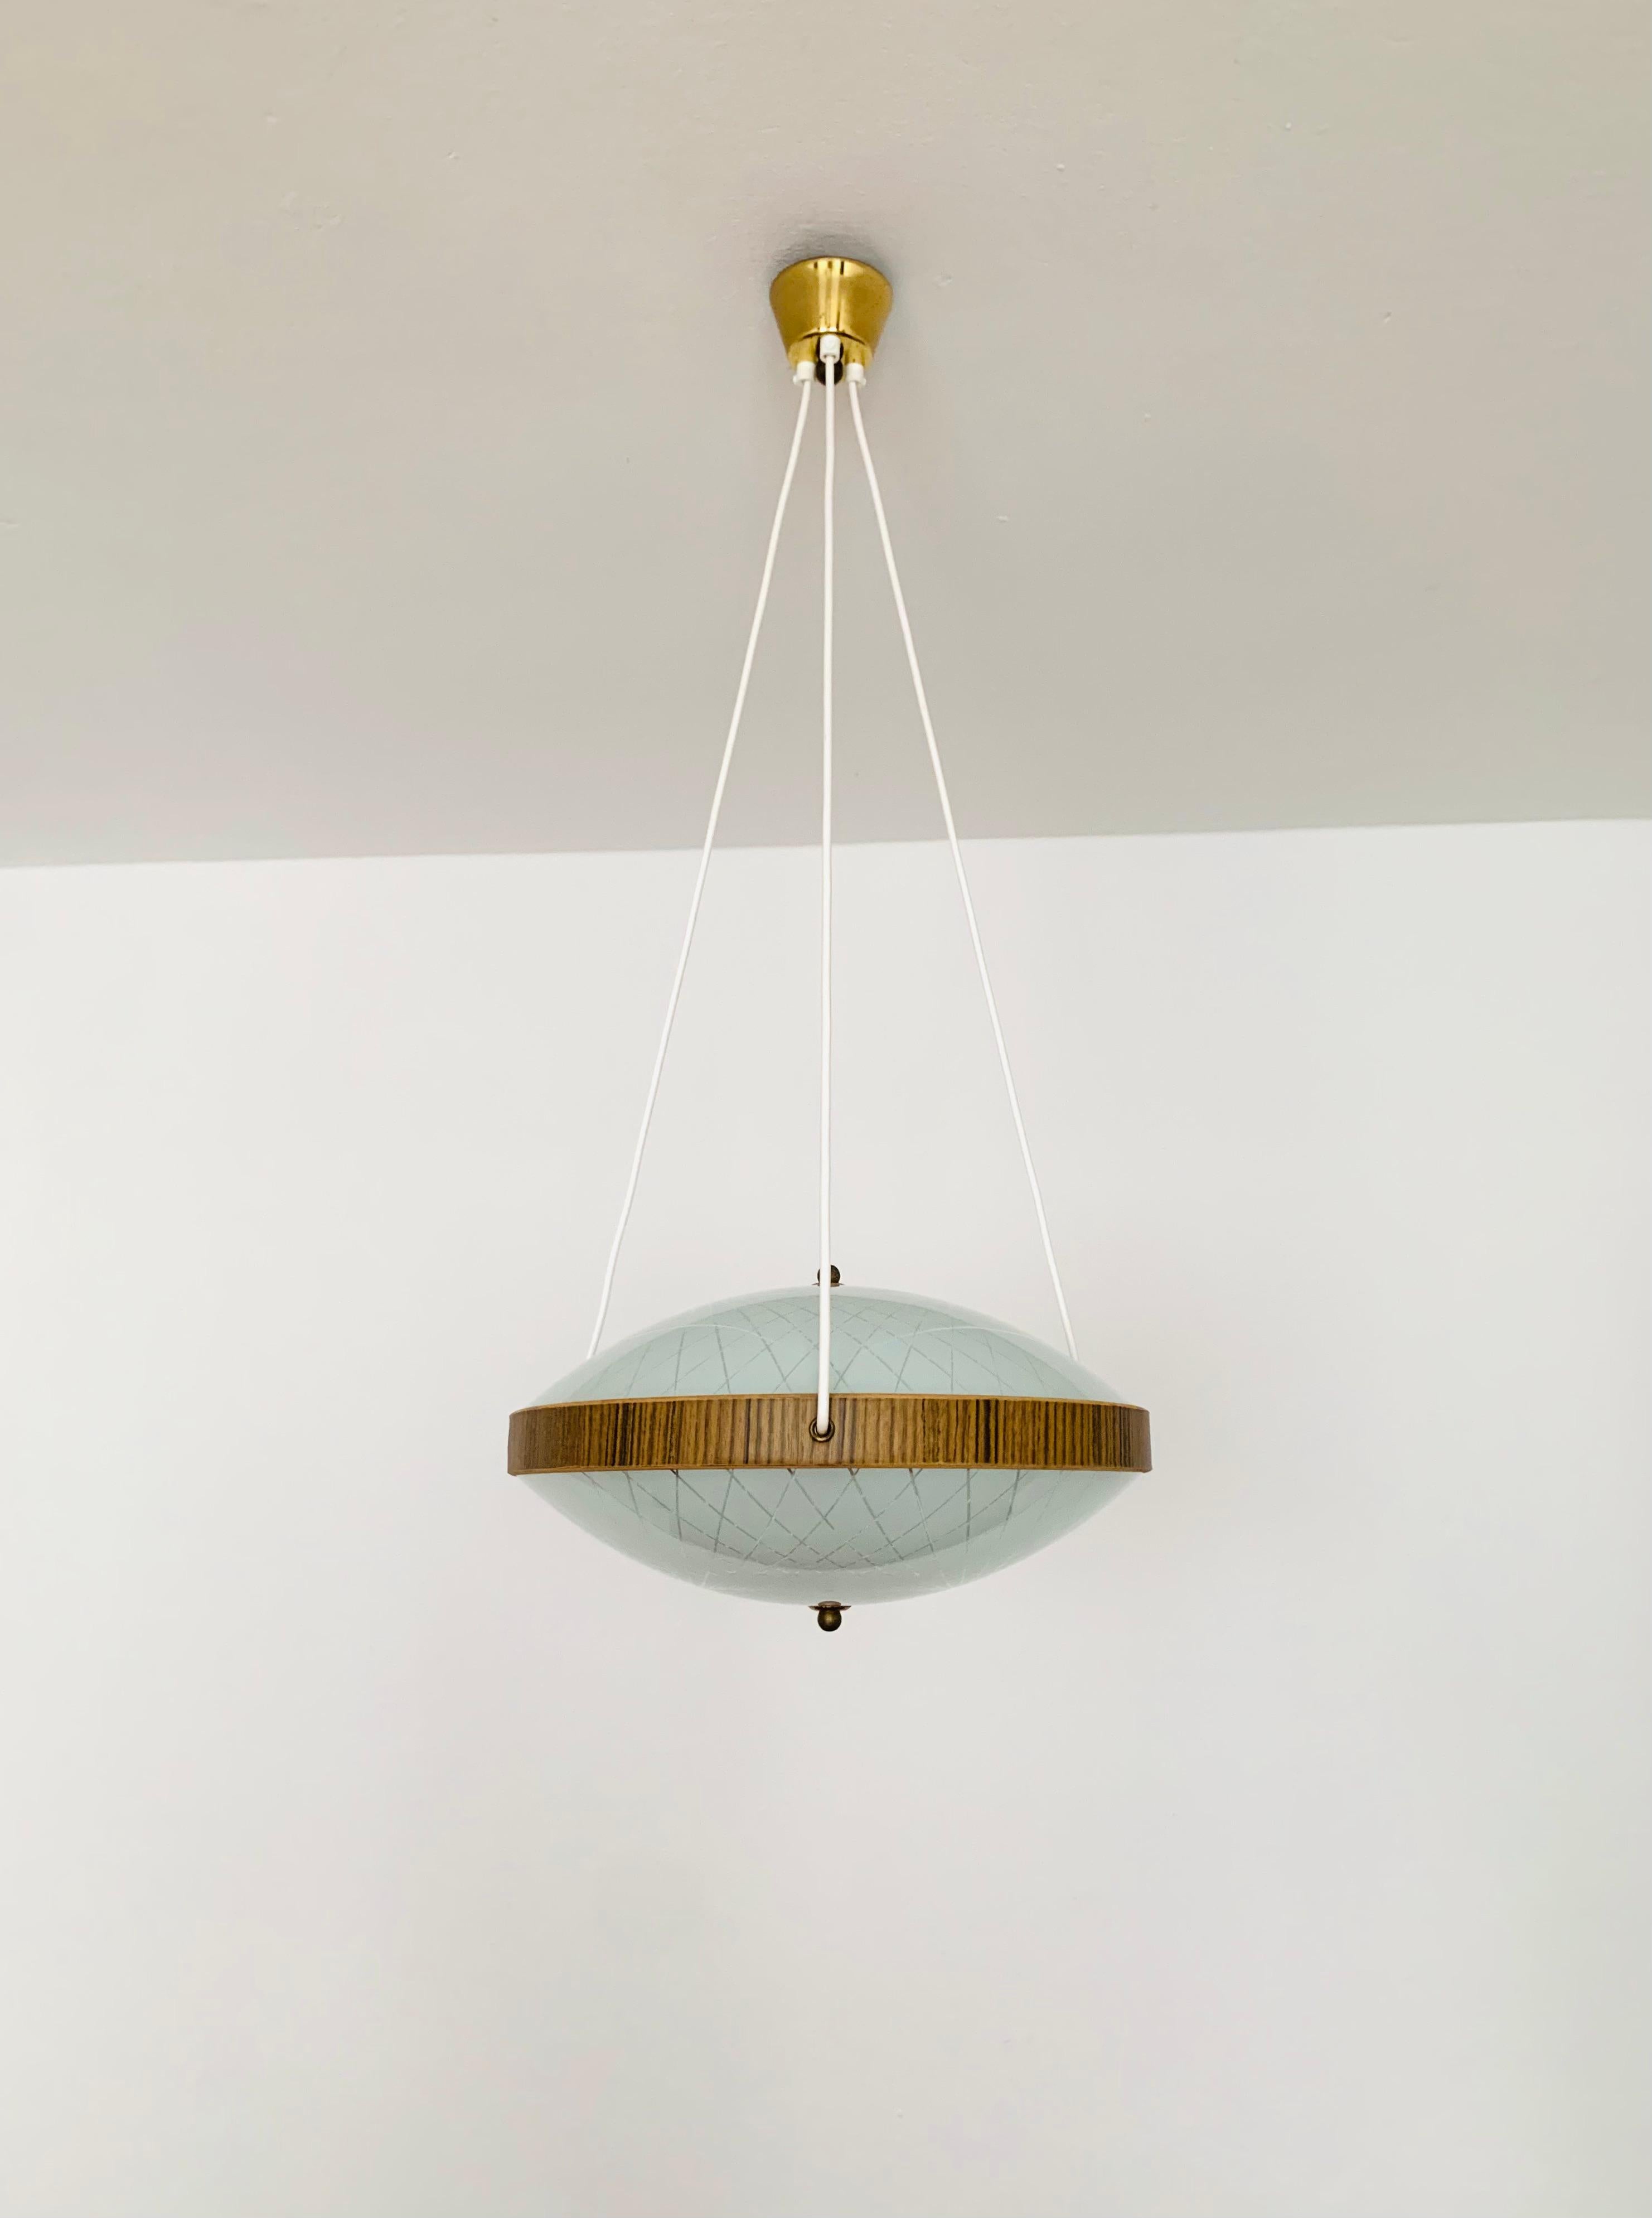 Exceptionally beautiful pendant lamp from the 1950s.
The great pattern in the glasses spreads a sparkling light.
Very fine and beautiful design which fits wonderfully into any room.

Condition:

Very good vintage condition with slight signs of